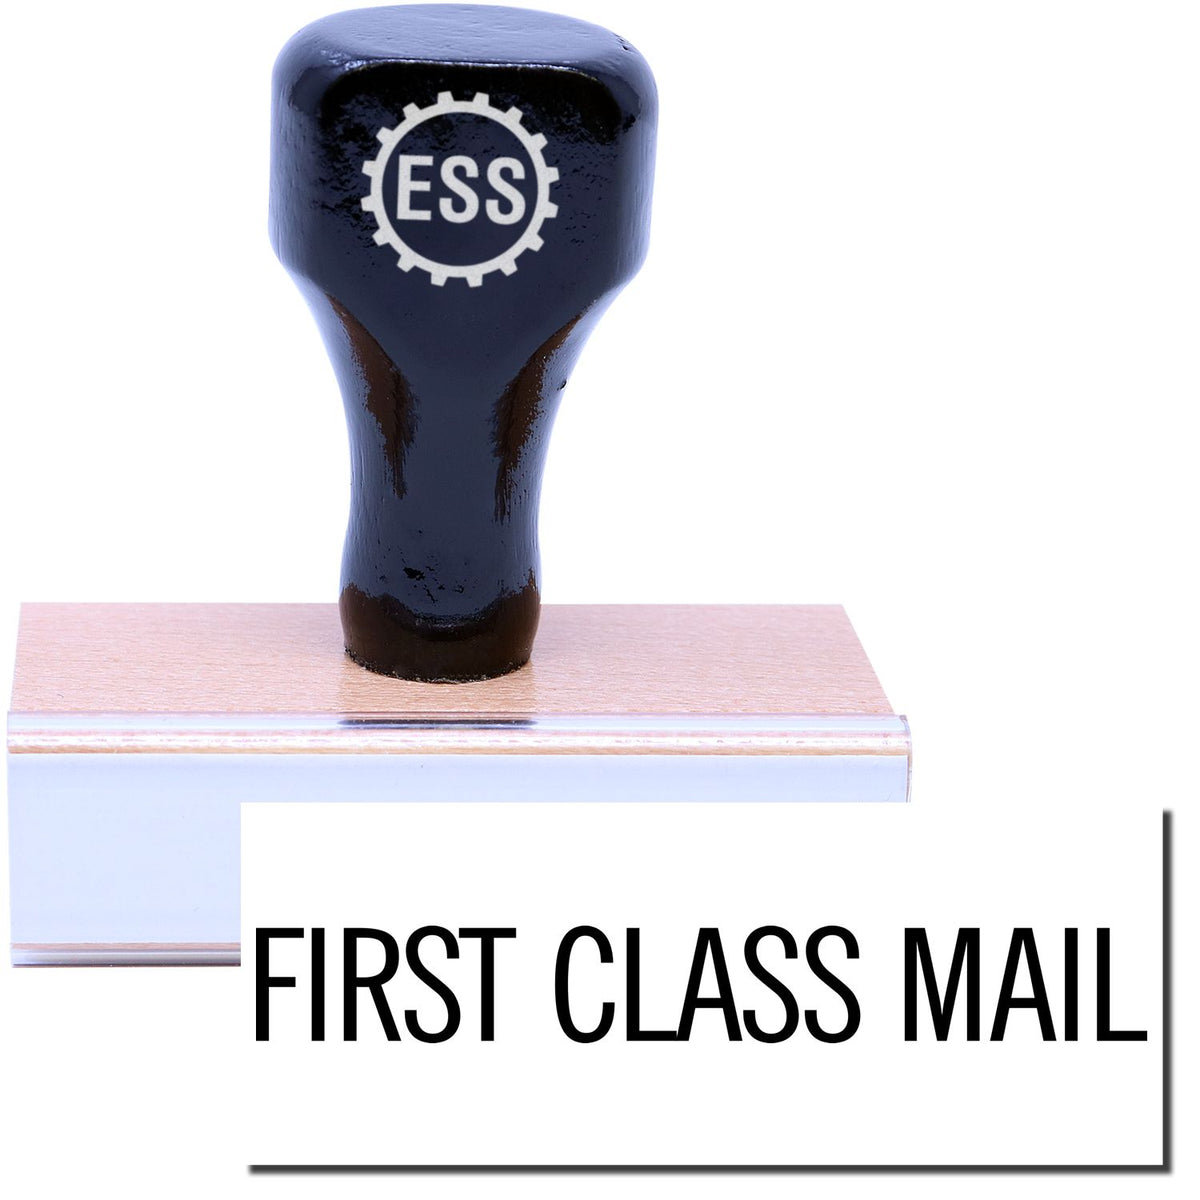 A stock office rubber stamp with a stamped image showing how the text &quot;FIRST CLASS MAIL&quot; in a narrow font is displayed after stamping.